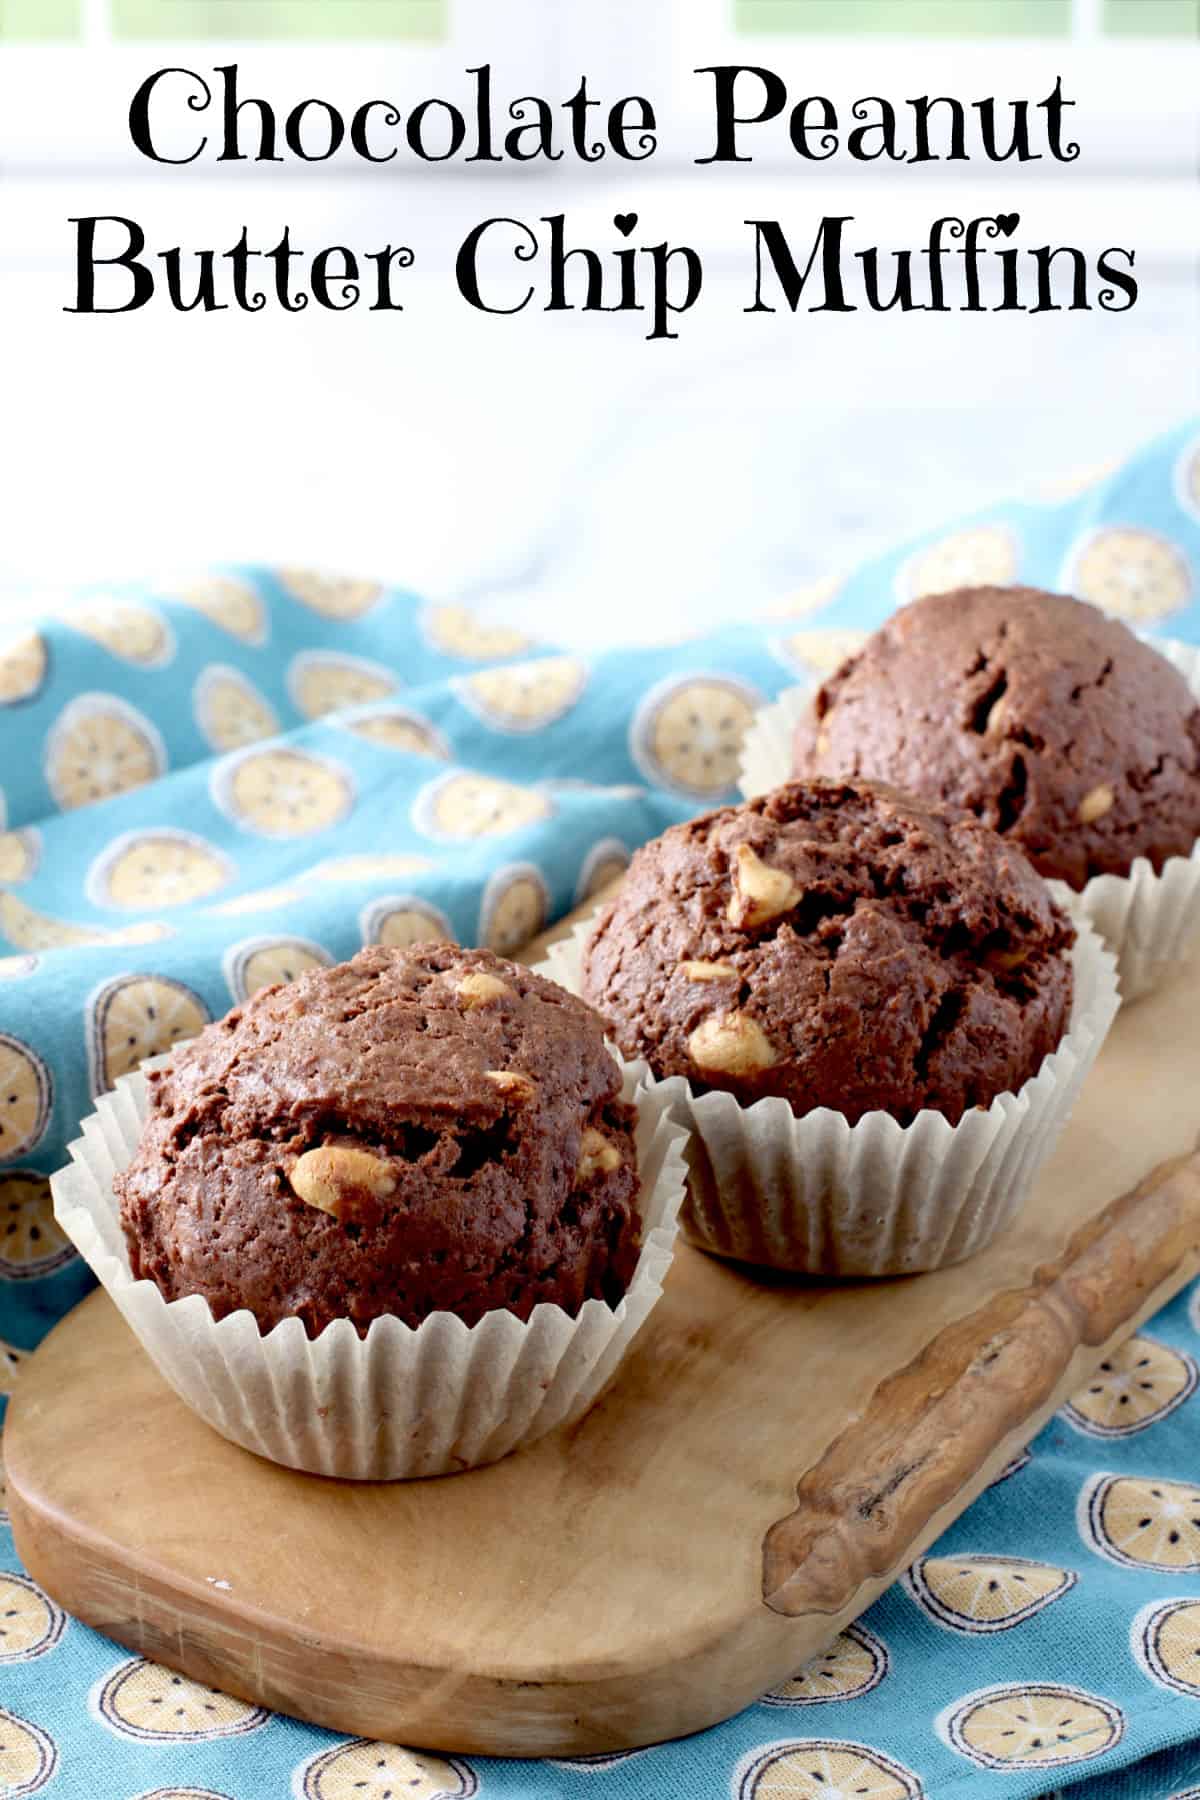 Three Chocolate Peanut Butter Chip Muffins on a wooden board.